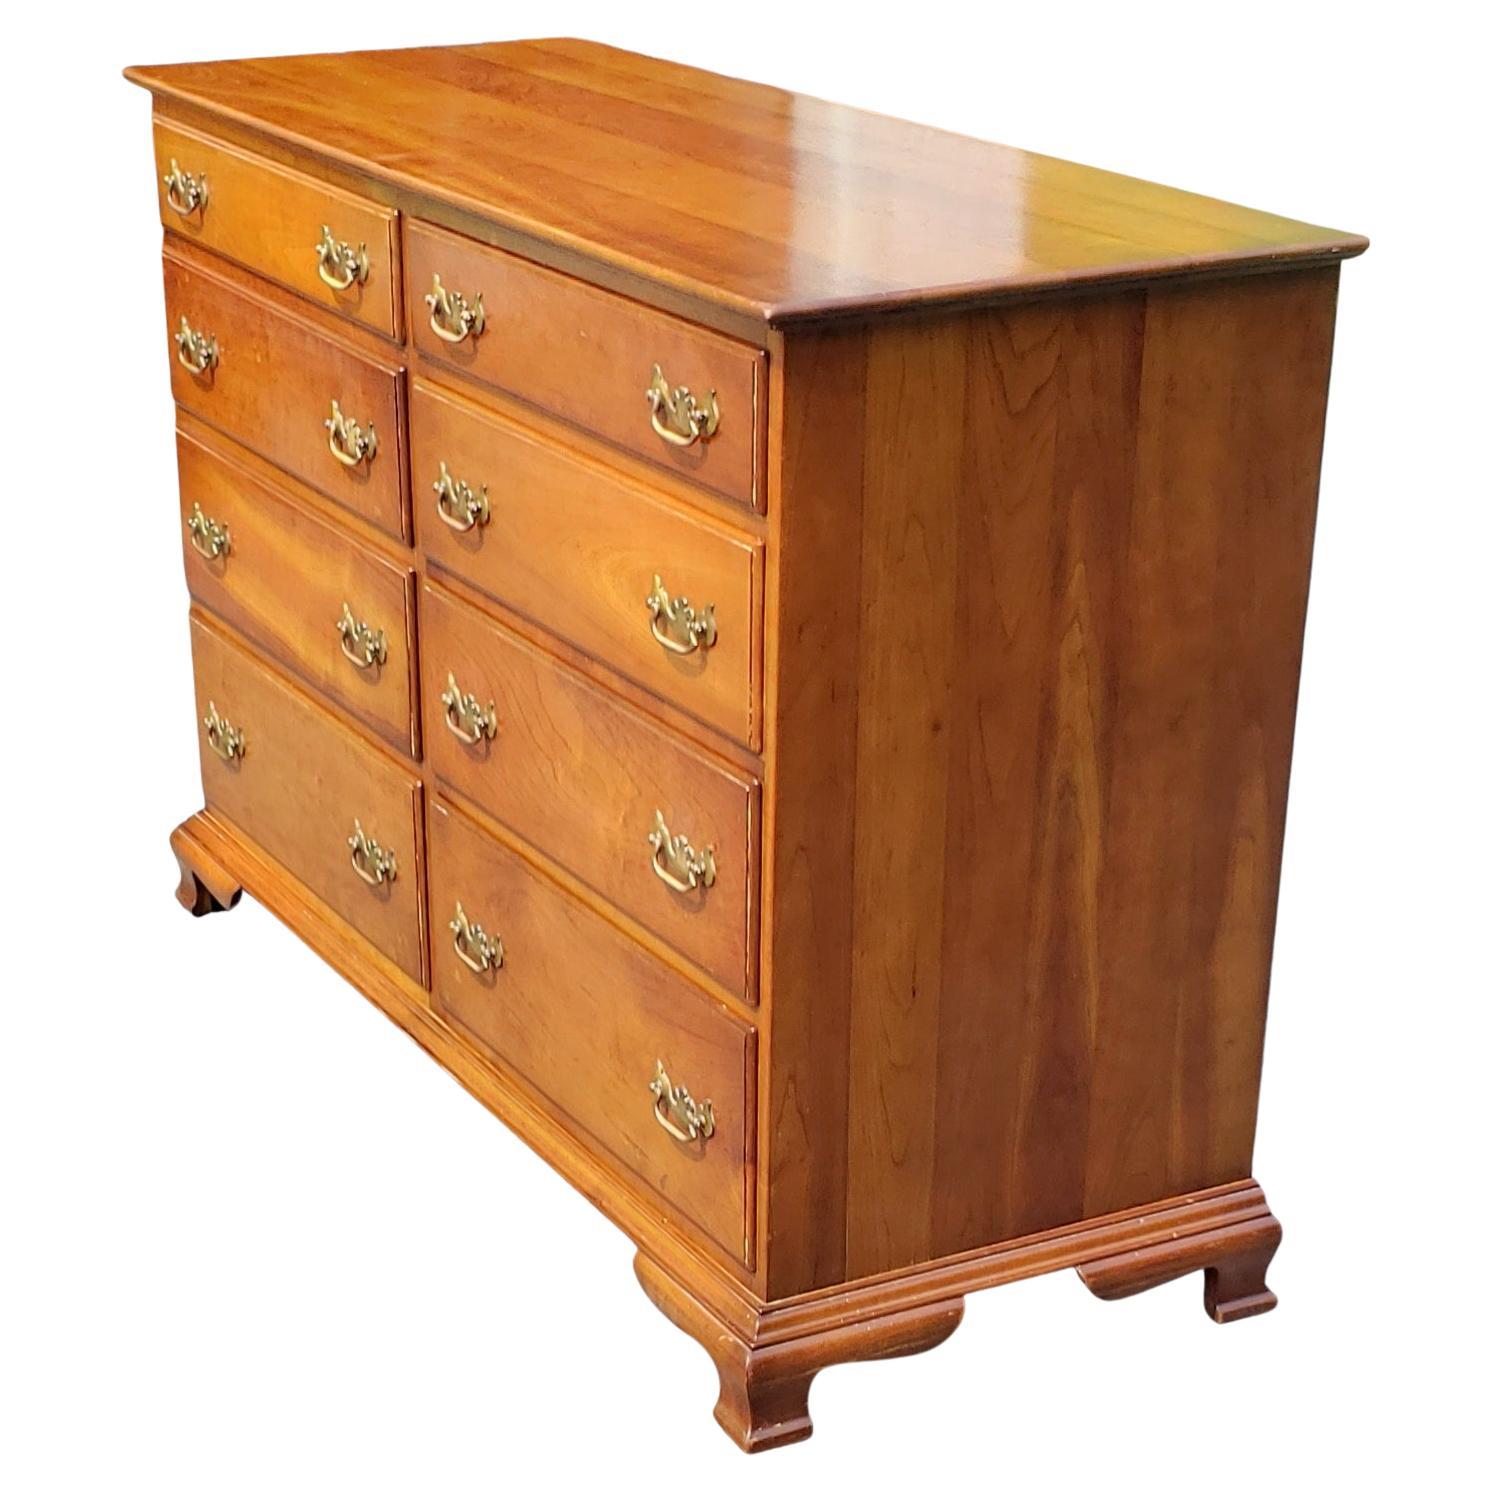 1957, Stickley Furniture Chippendale Solid Cherry 8-Drawer Double Dresser In Good Condition For Sale In Germantown, MD